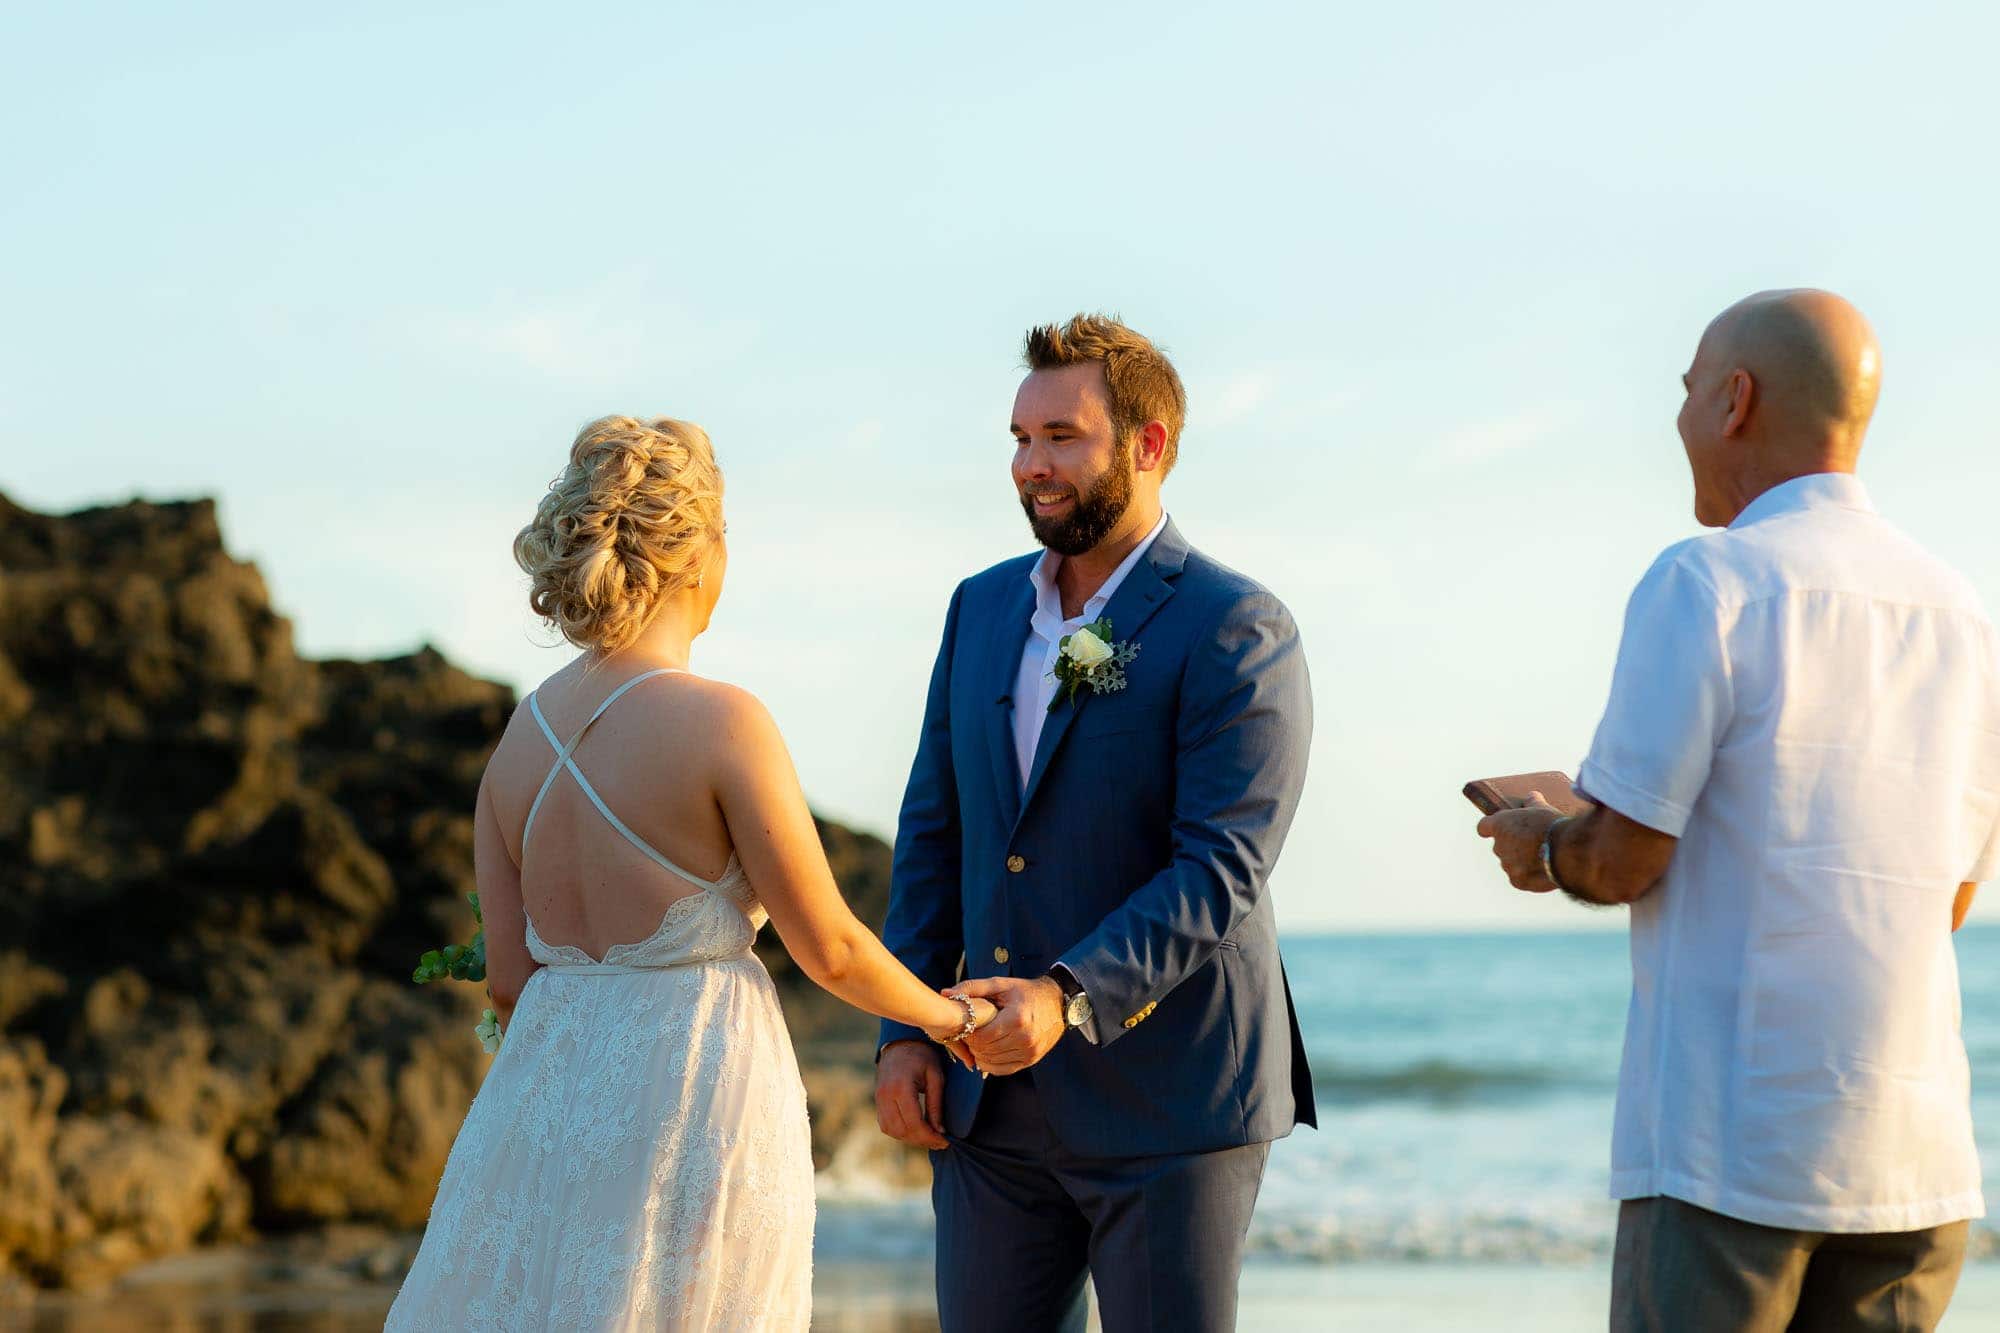 A "just the two of us" ceremony on the beach